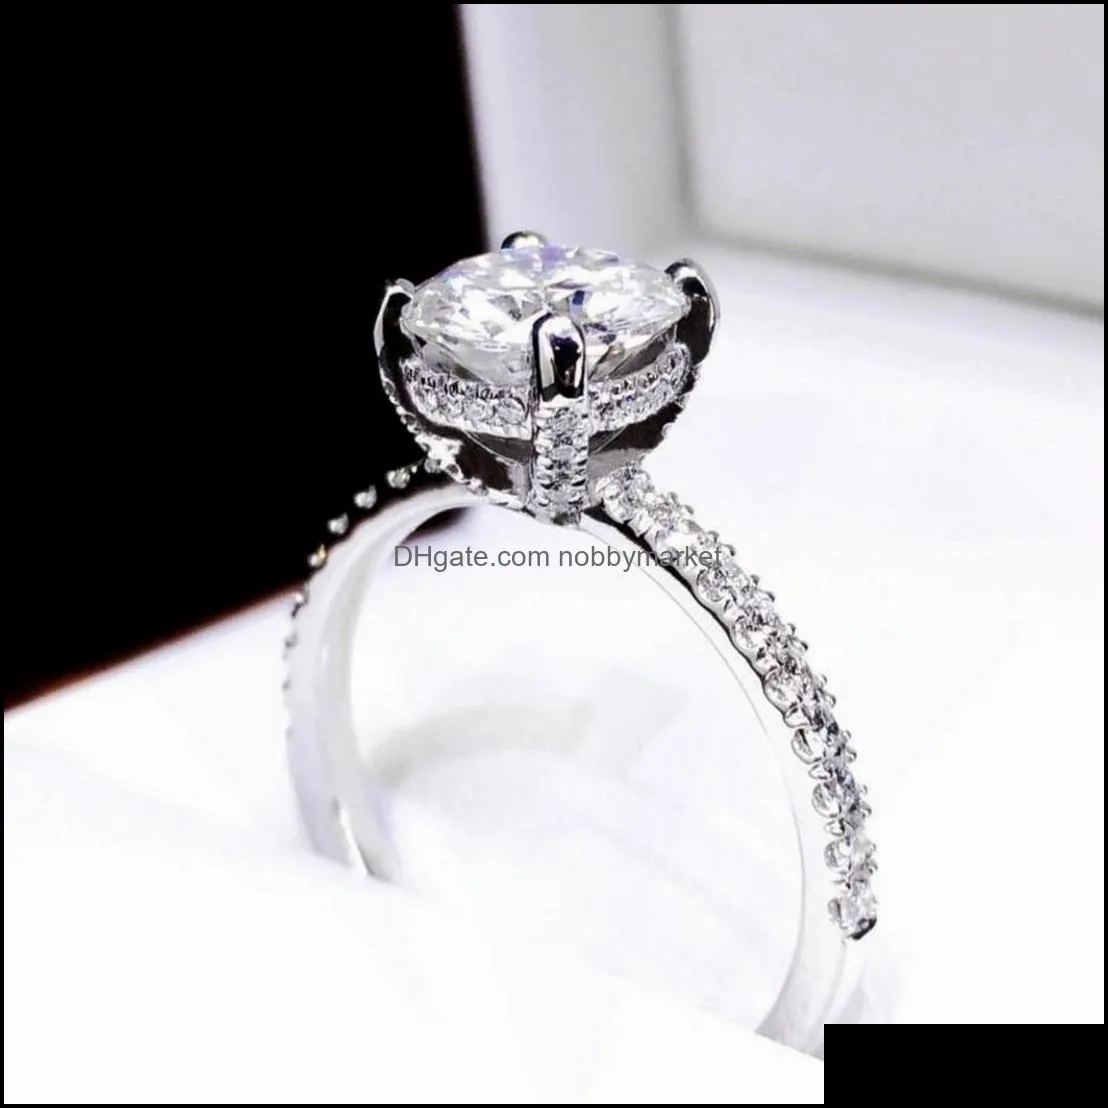 Solitaire 925 Sterling Silver 2Ct Cushion cut Diamond Wedding Engagement Rings For Women Fashion Ring finger Fine Jewelry Wholesale